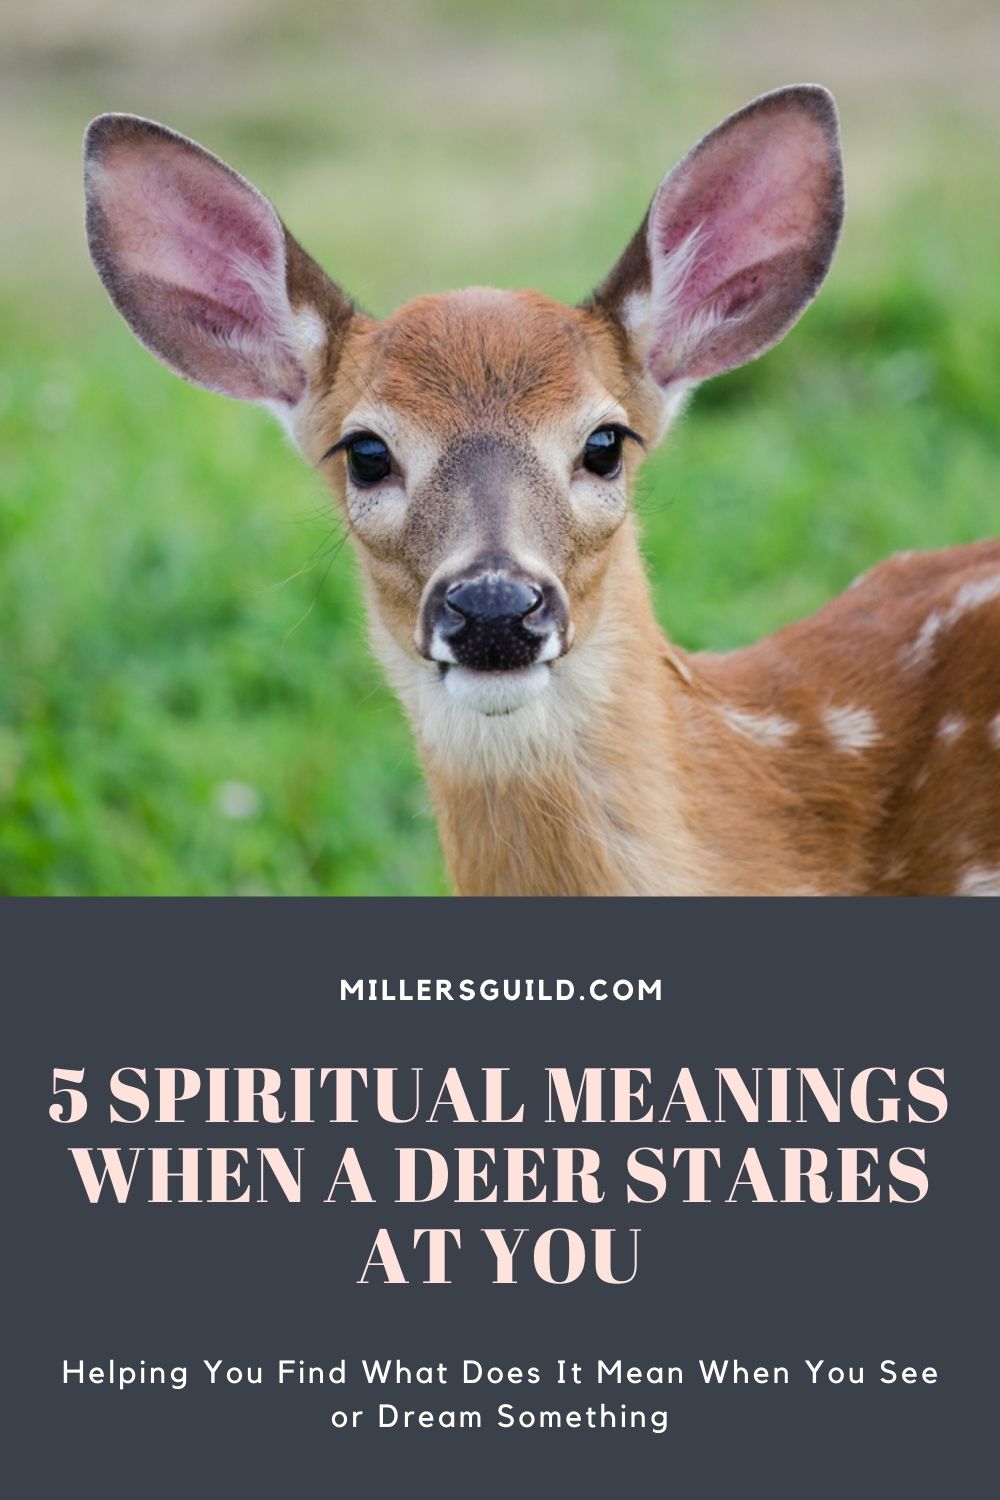 5 Spiritual Meanings When a Deer Stares at You 1